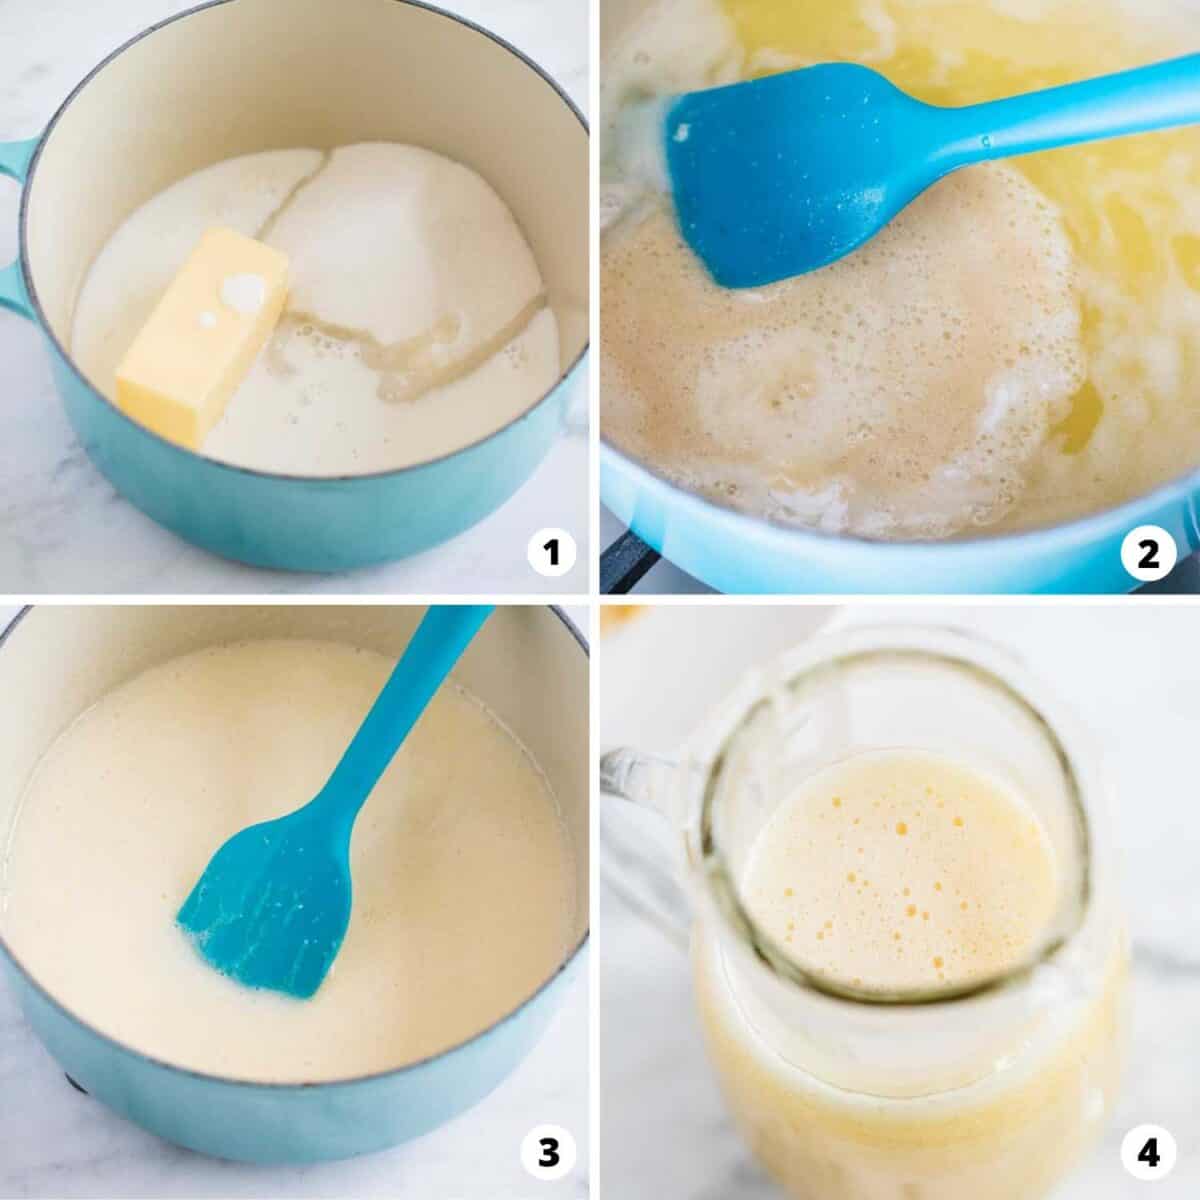 Showing how to make buttermilk syrup in a 4 step collage.